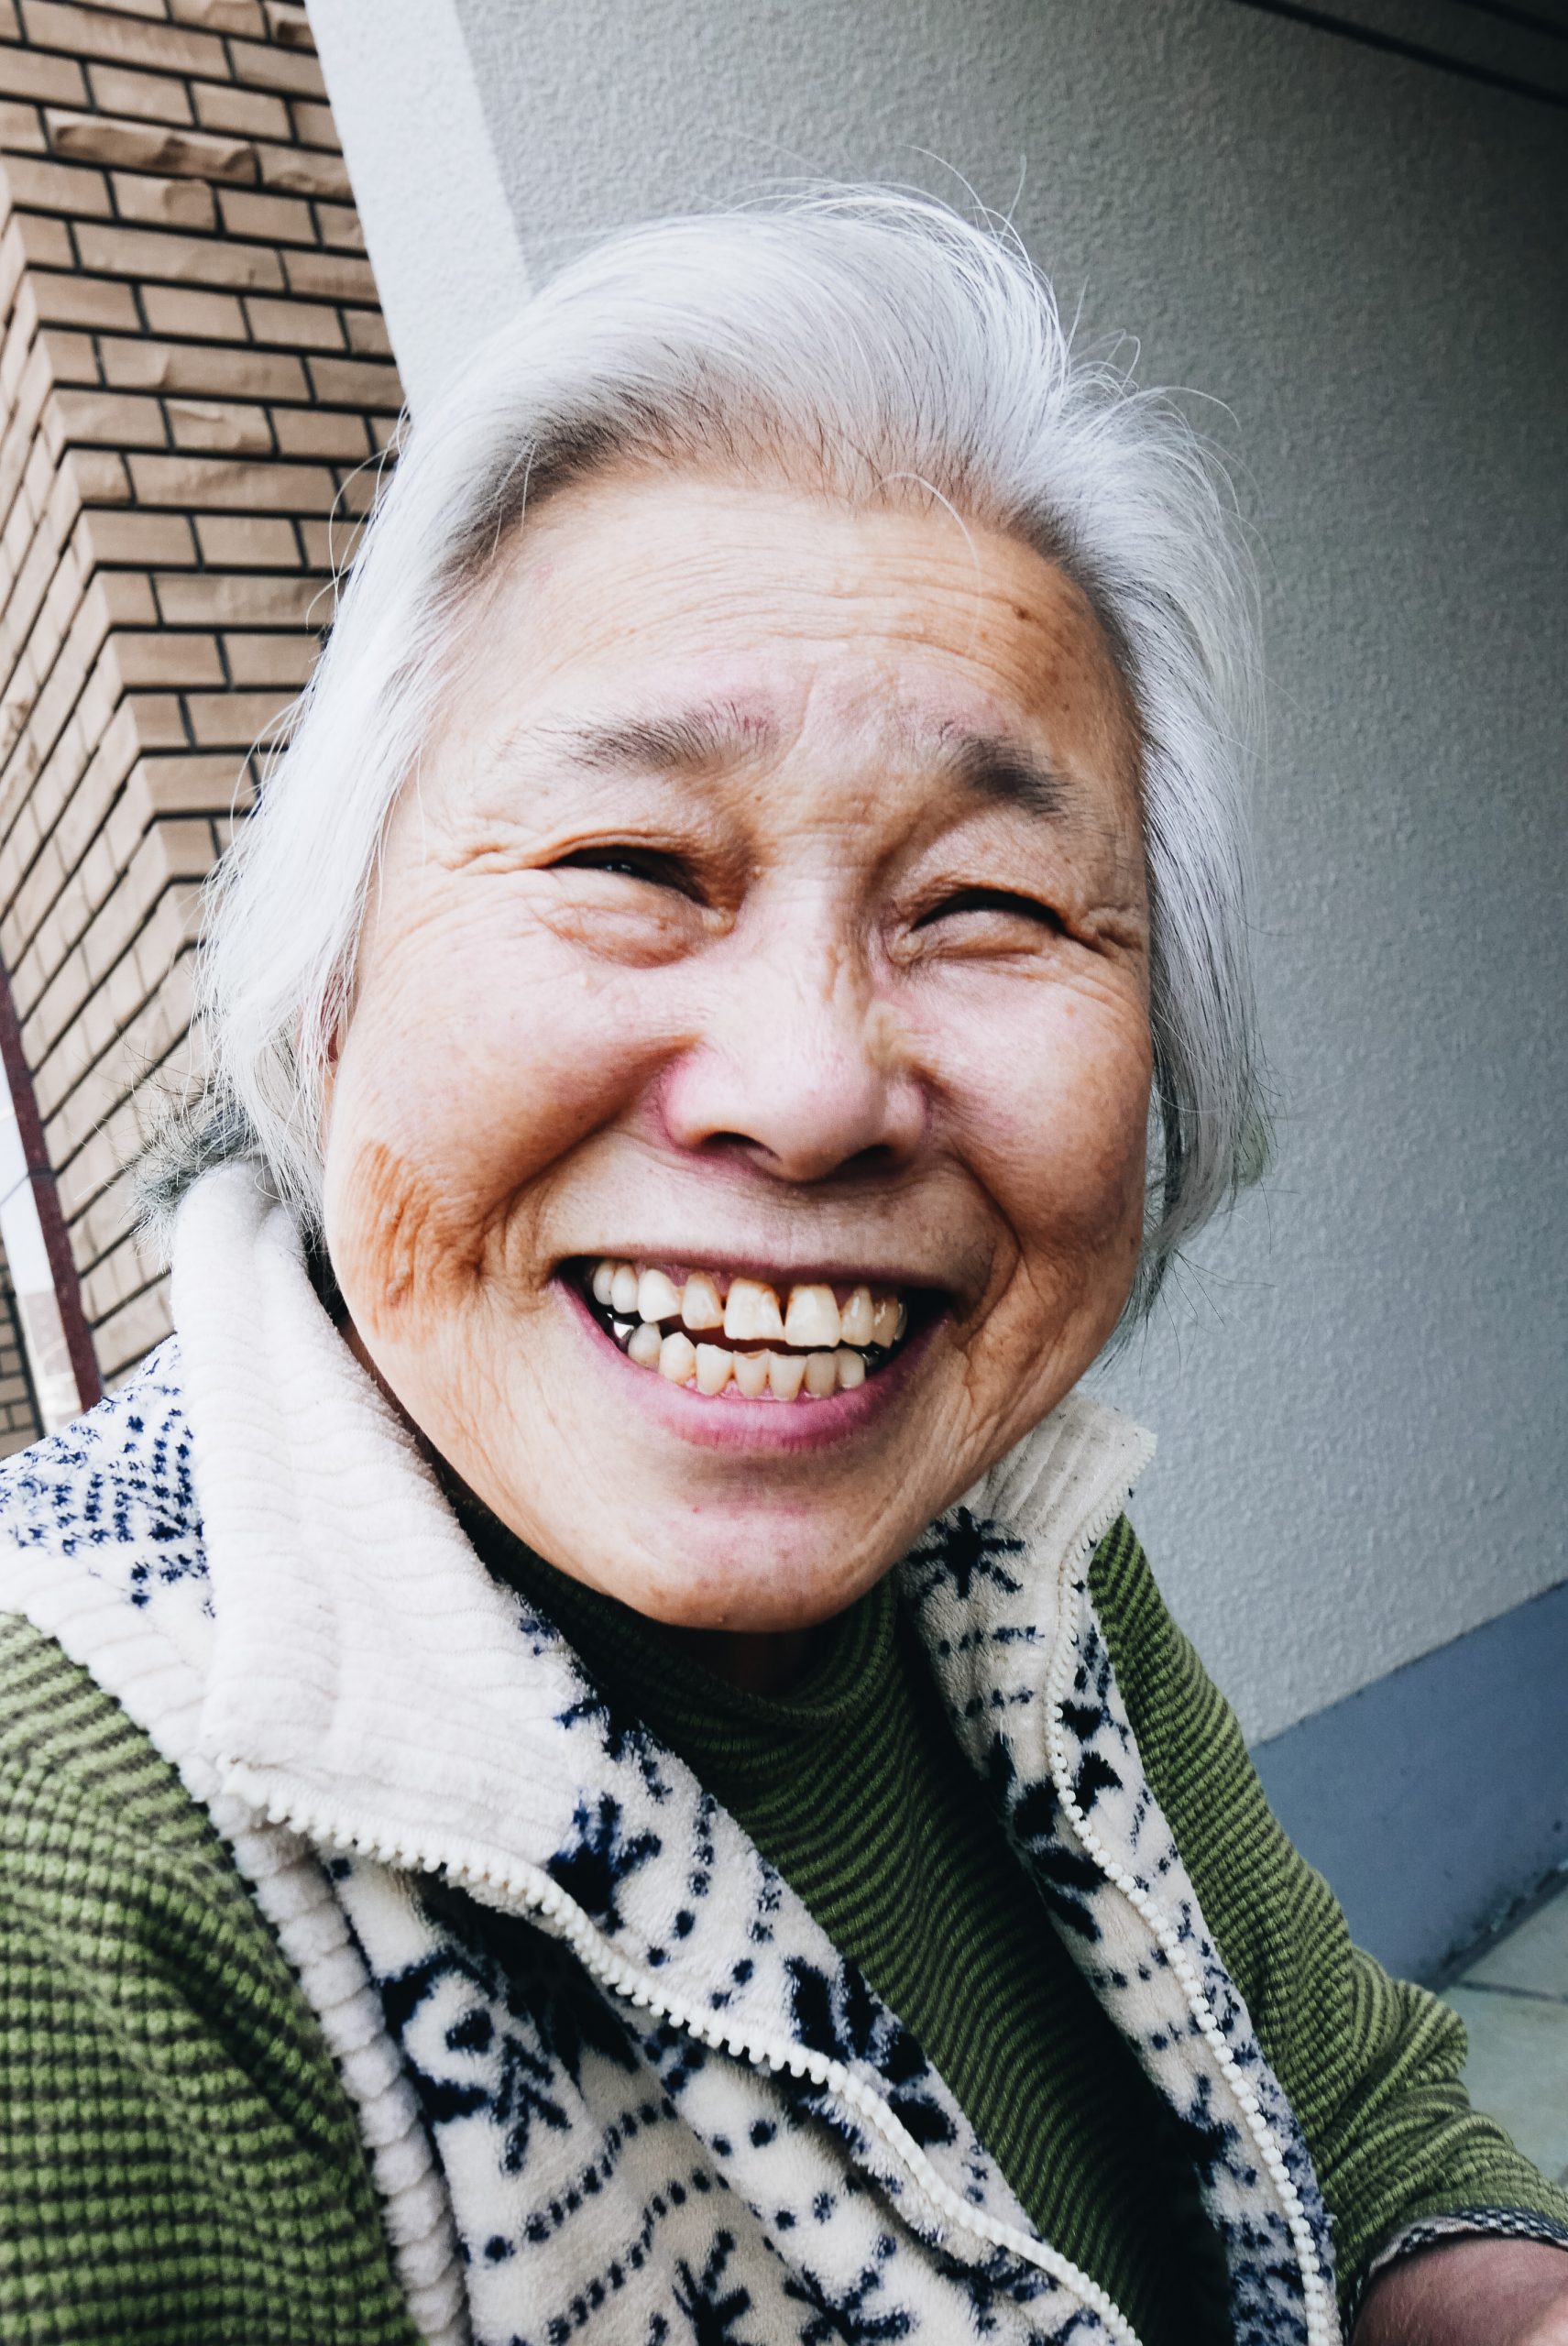 Kyoto older woman, street portrait. 2018. Looking at this photograph puts a huge smile on my face!